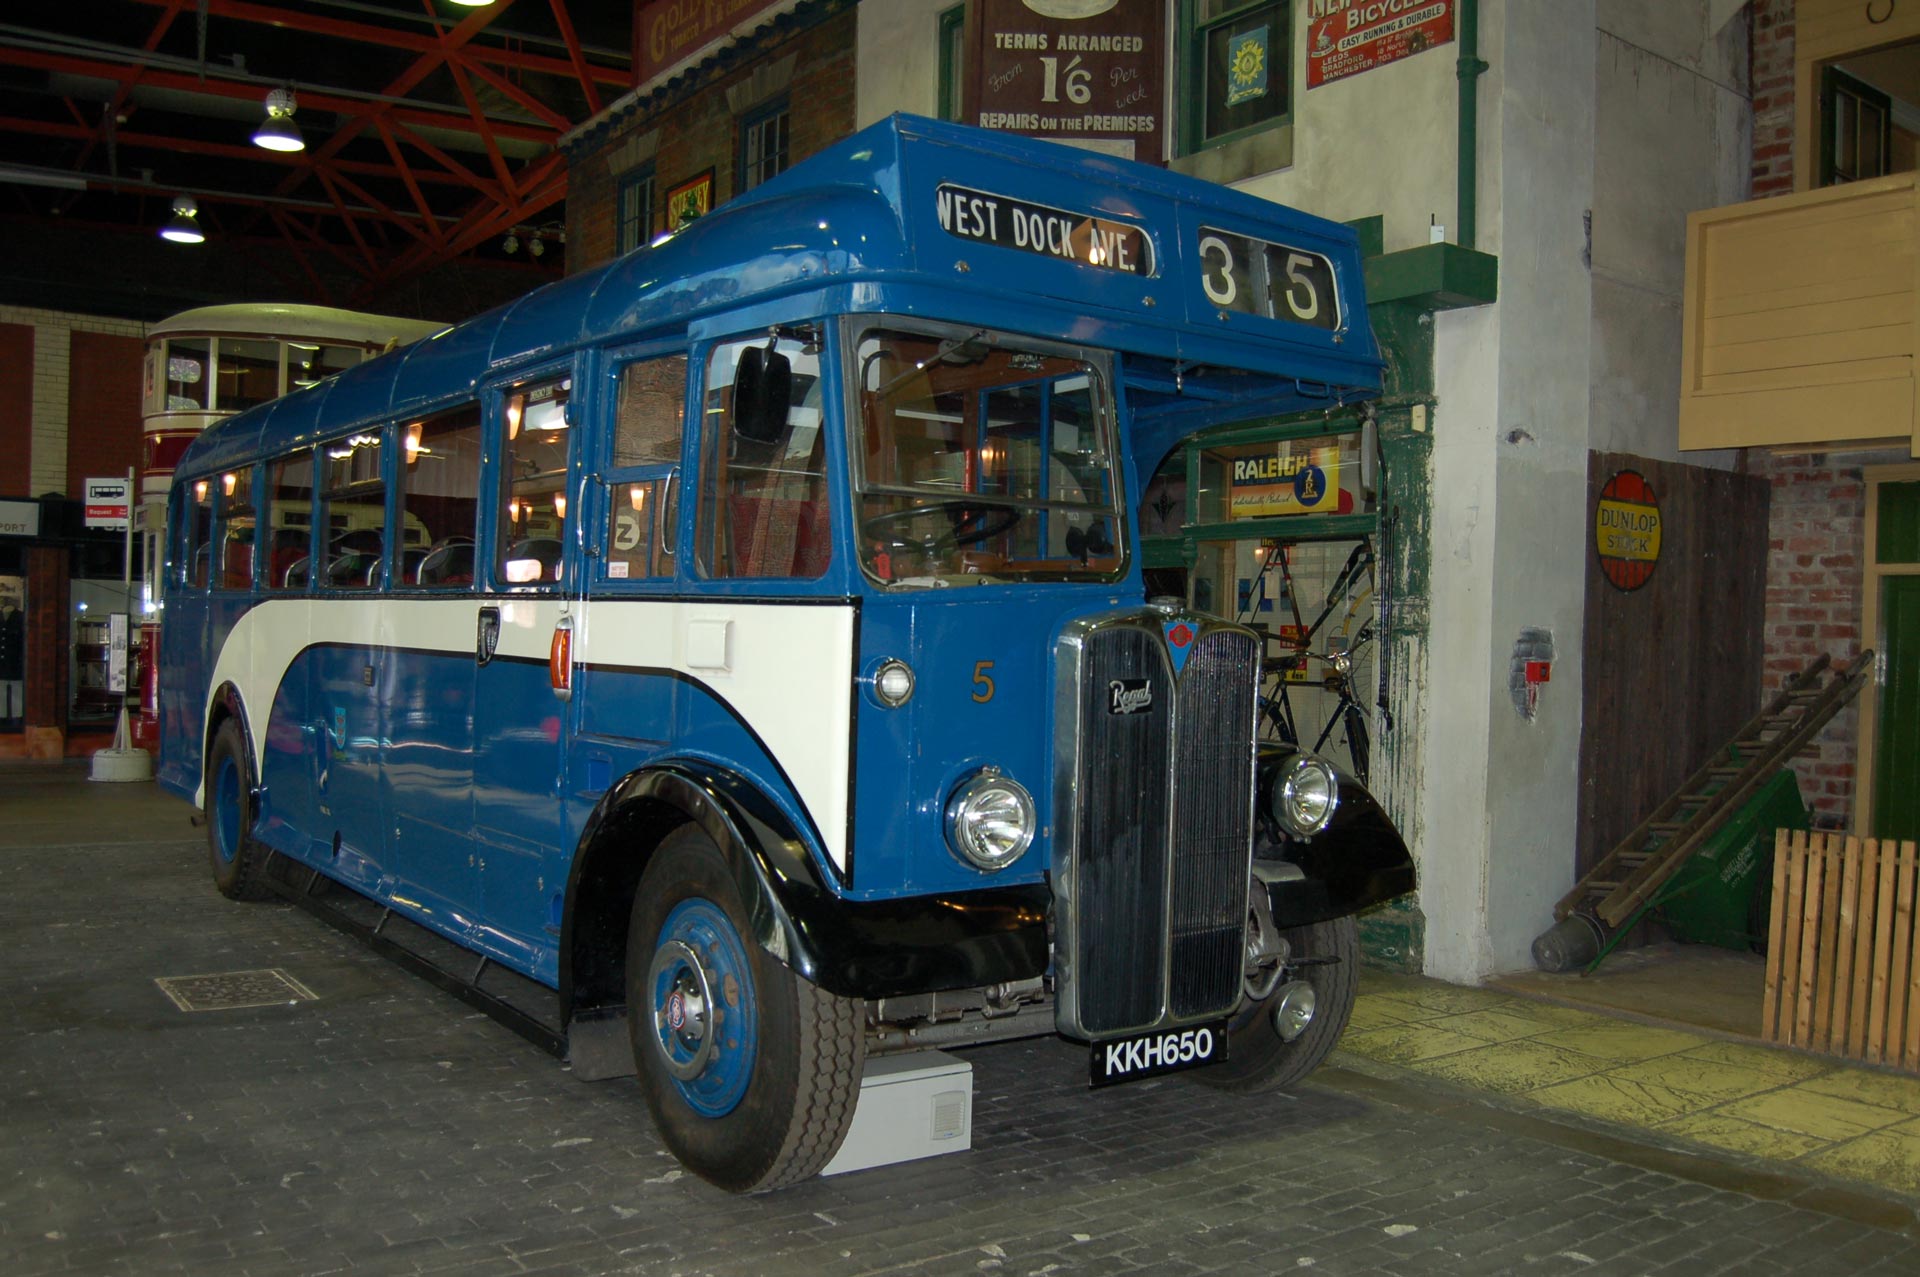 A blue and white vintage bus